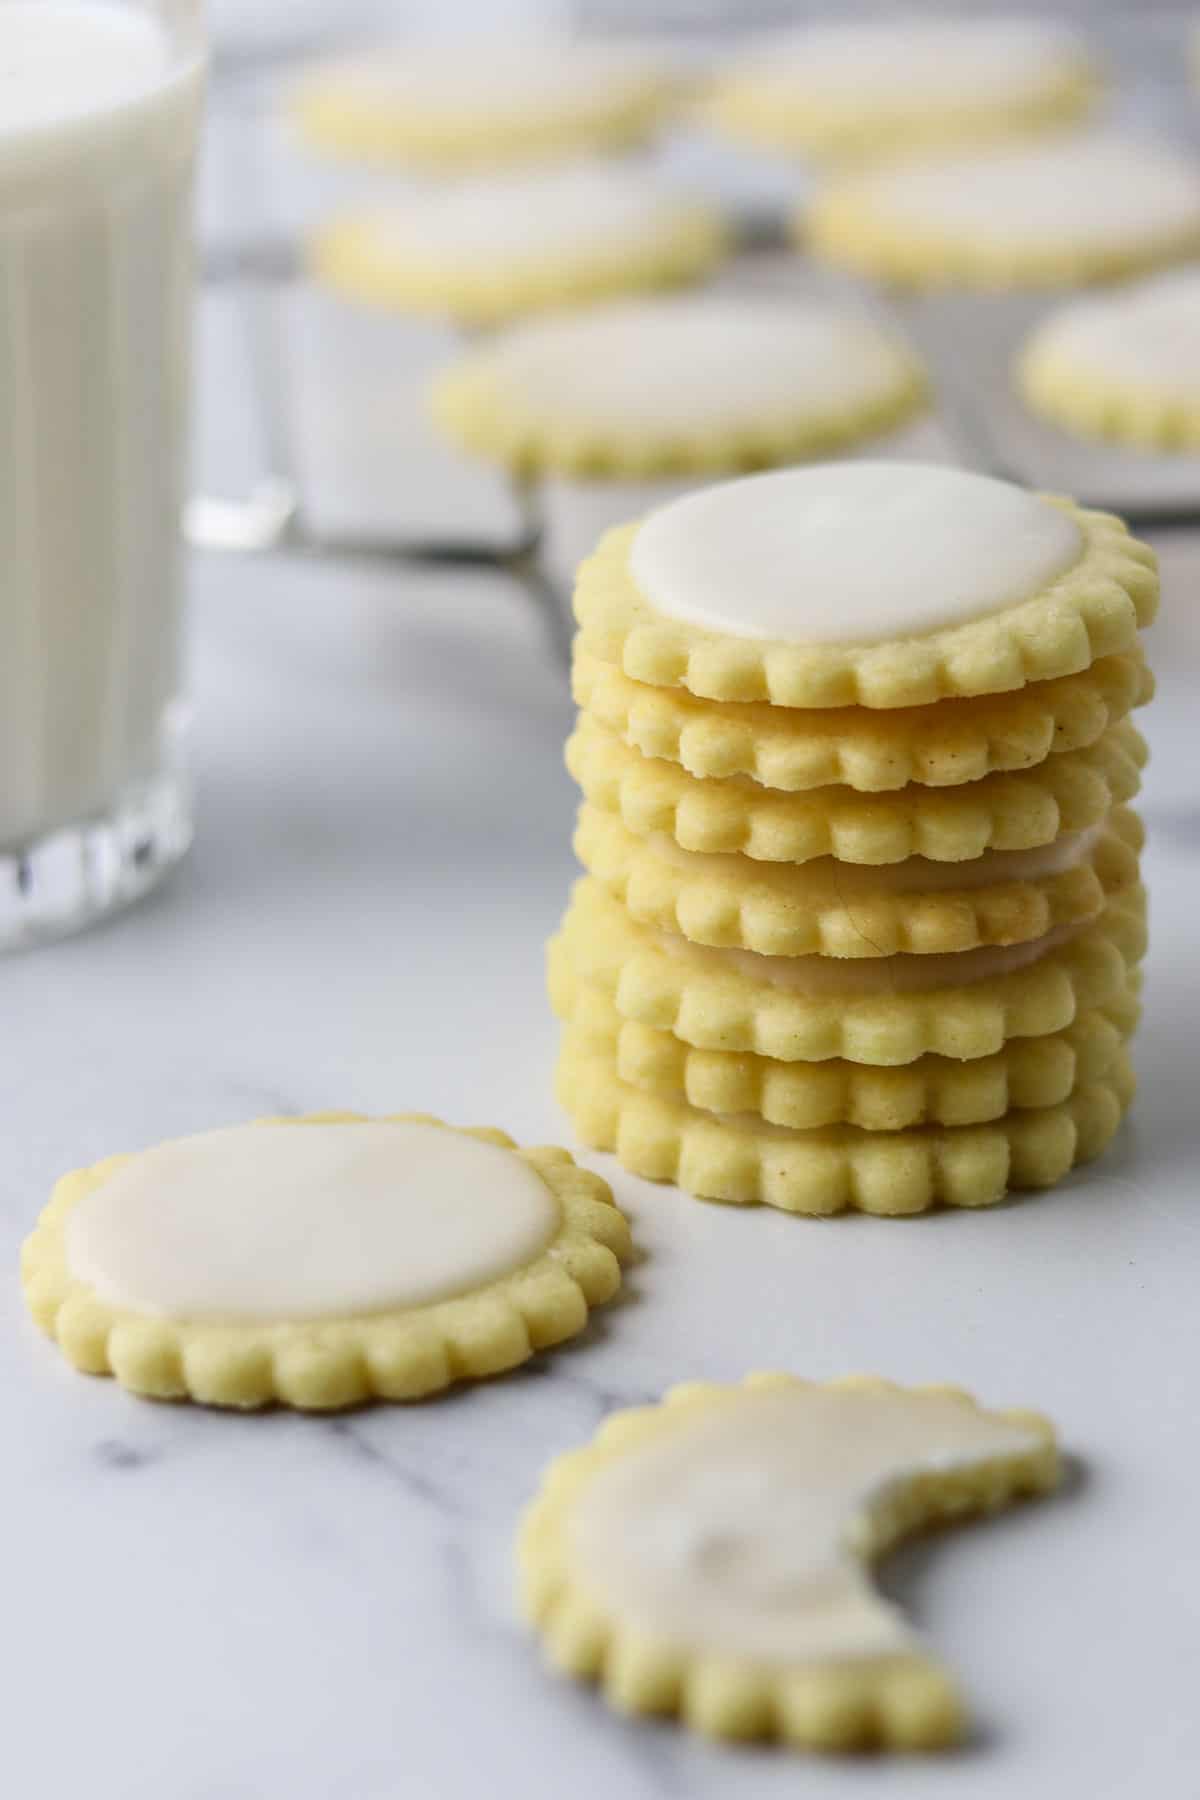 A stack of Nordic Lemon Wafers on a marble surface next to a glass of milk.